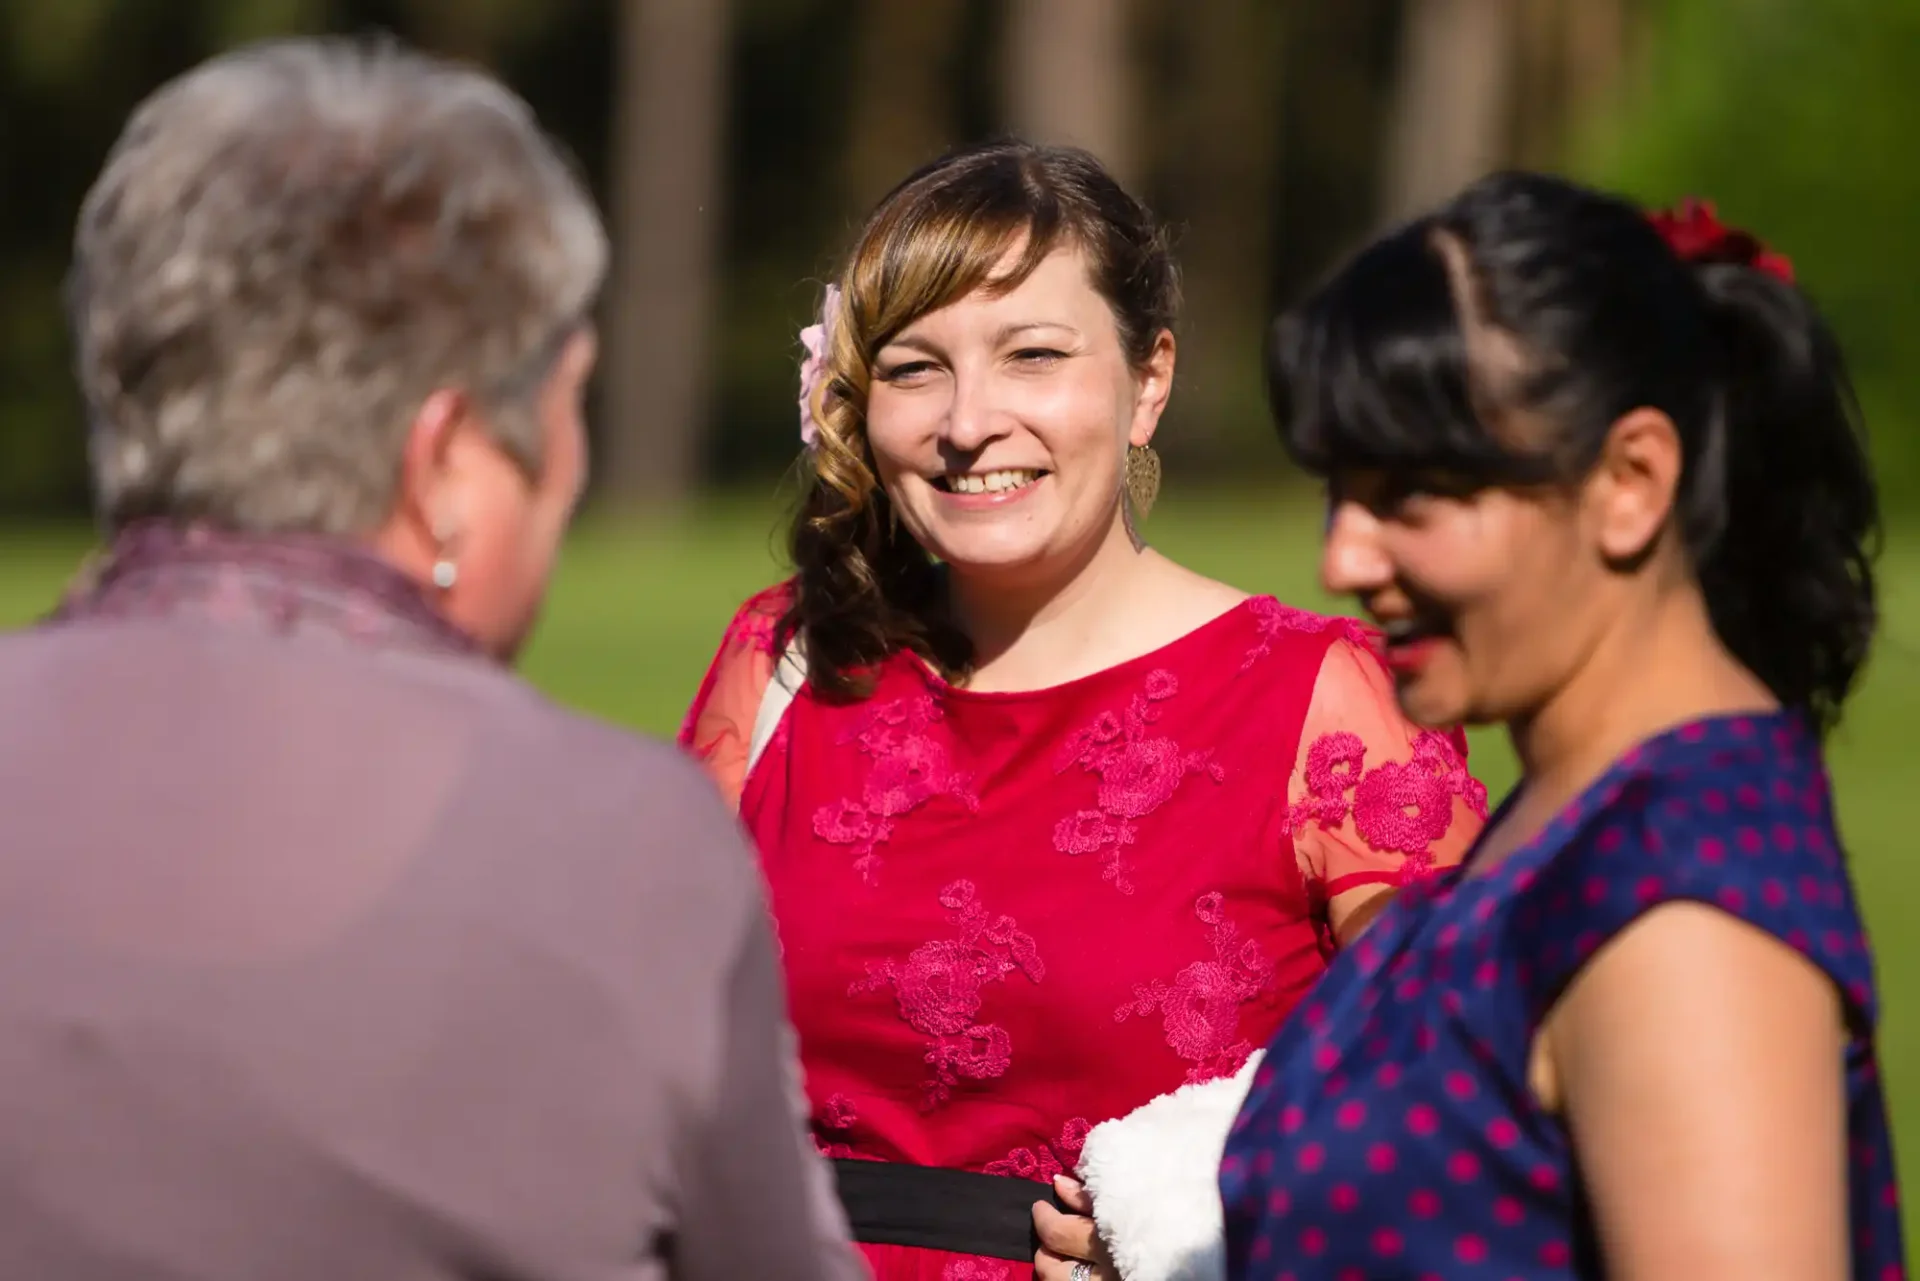 Two women in red dresses smiling and conversing with another person outdoors on a sunny day.